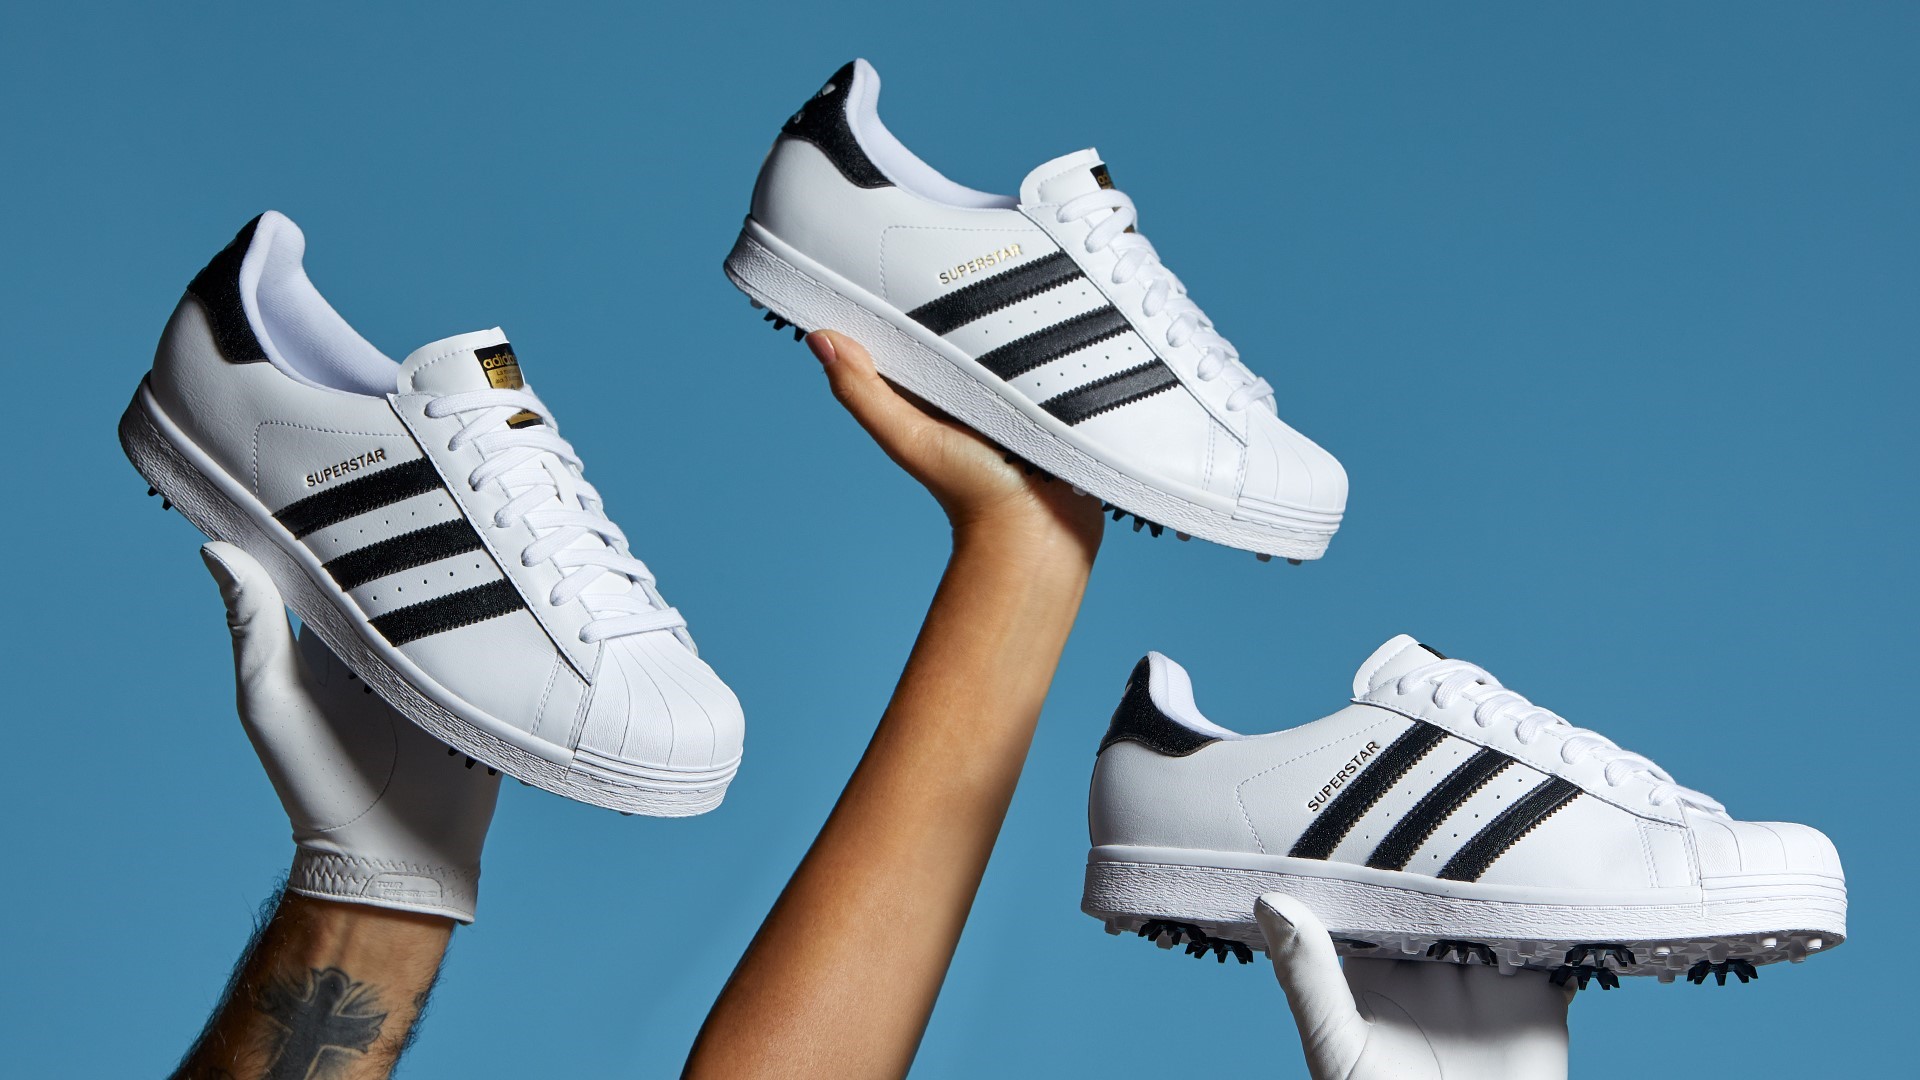 Corteza localizar Impedir Limited Edition Superstar Brings Iconic 3-Stripes Footwear to the Course